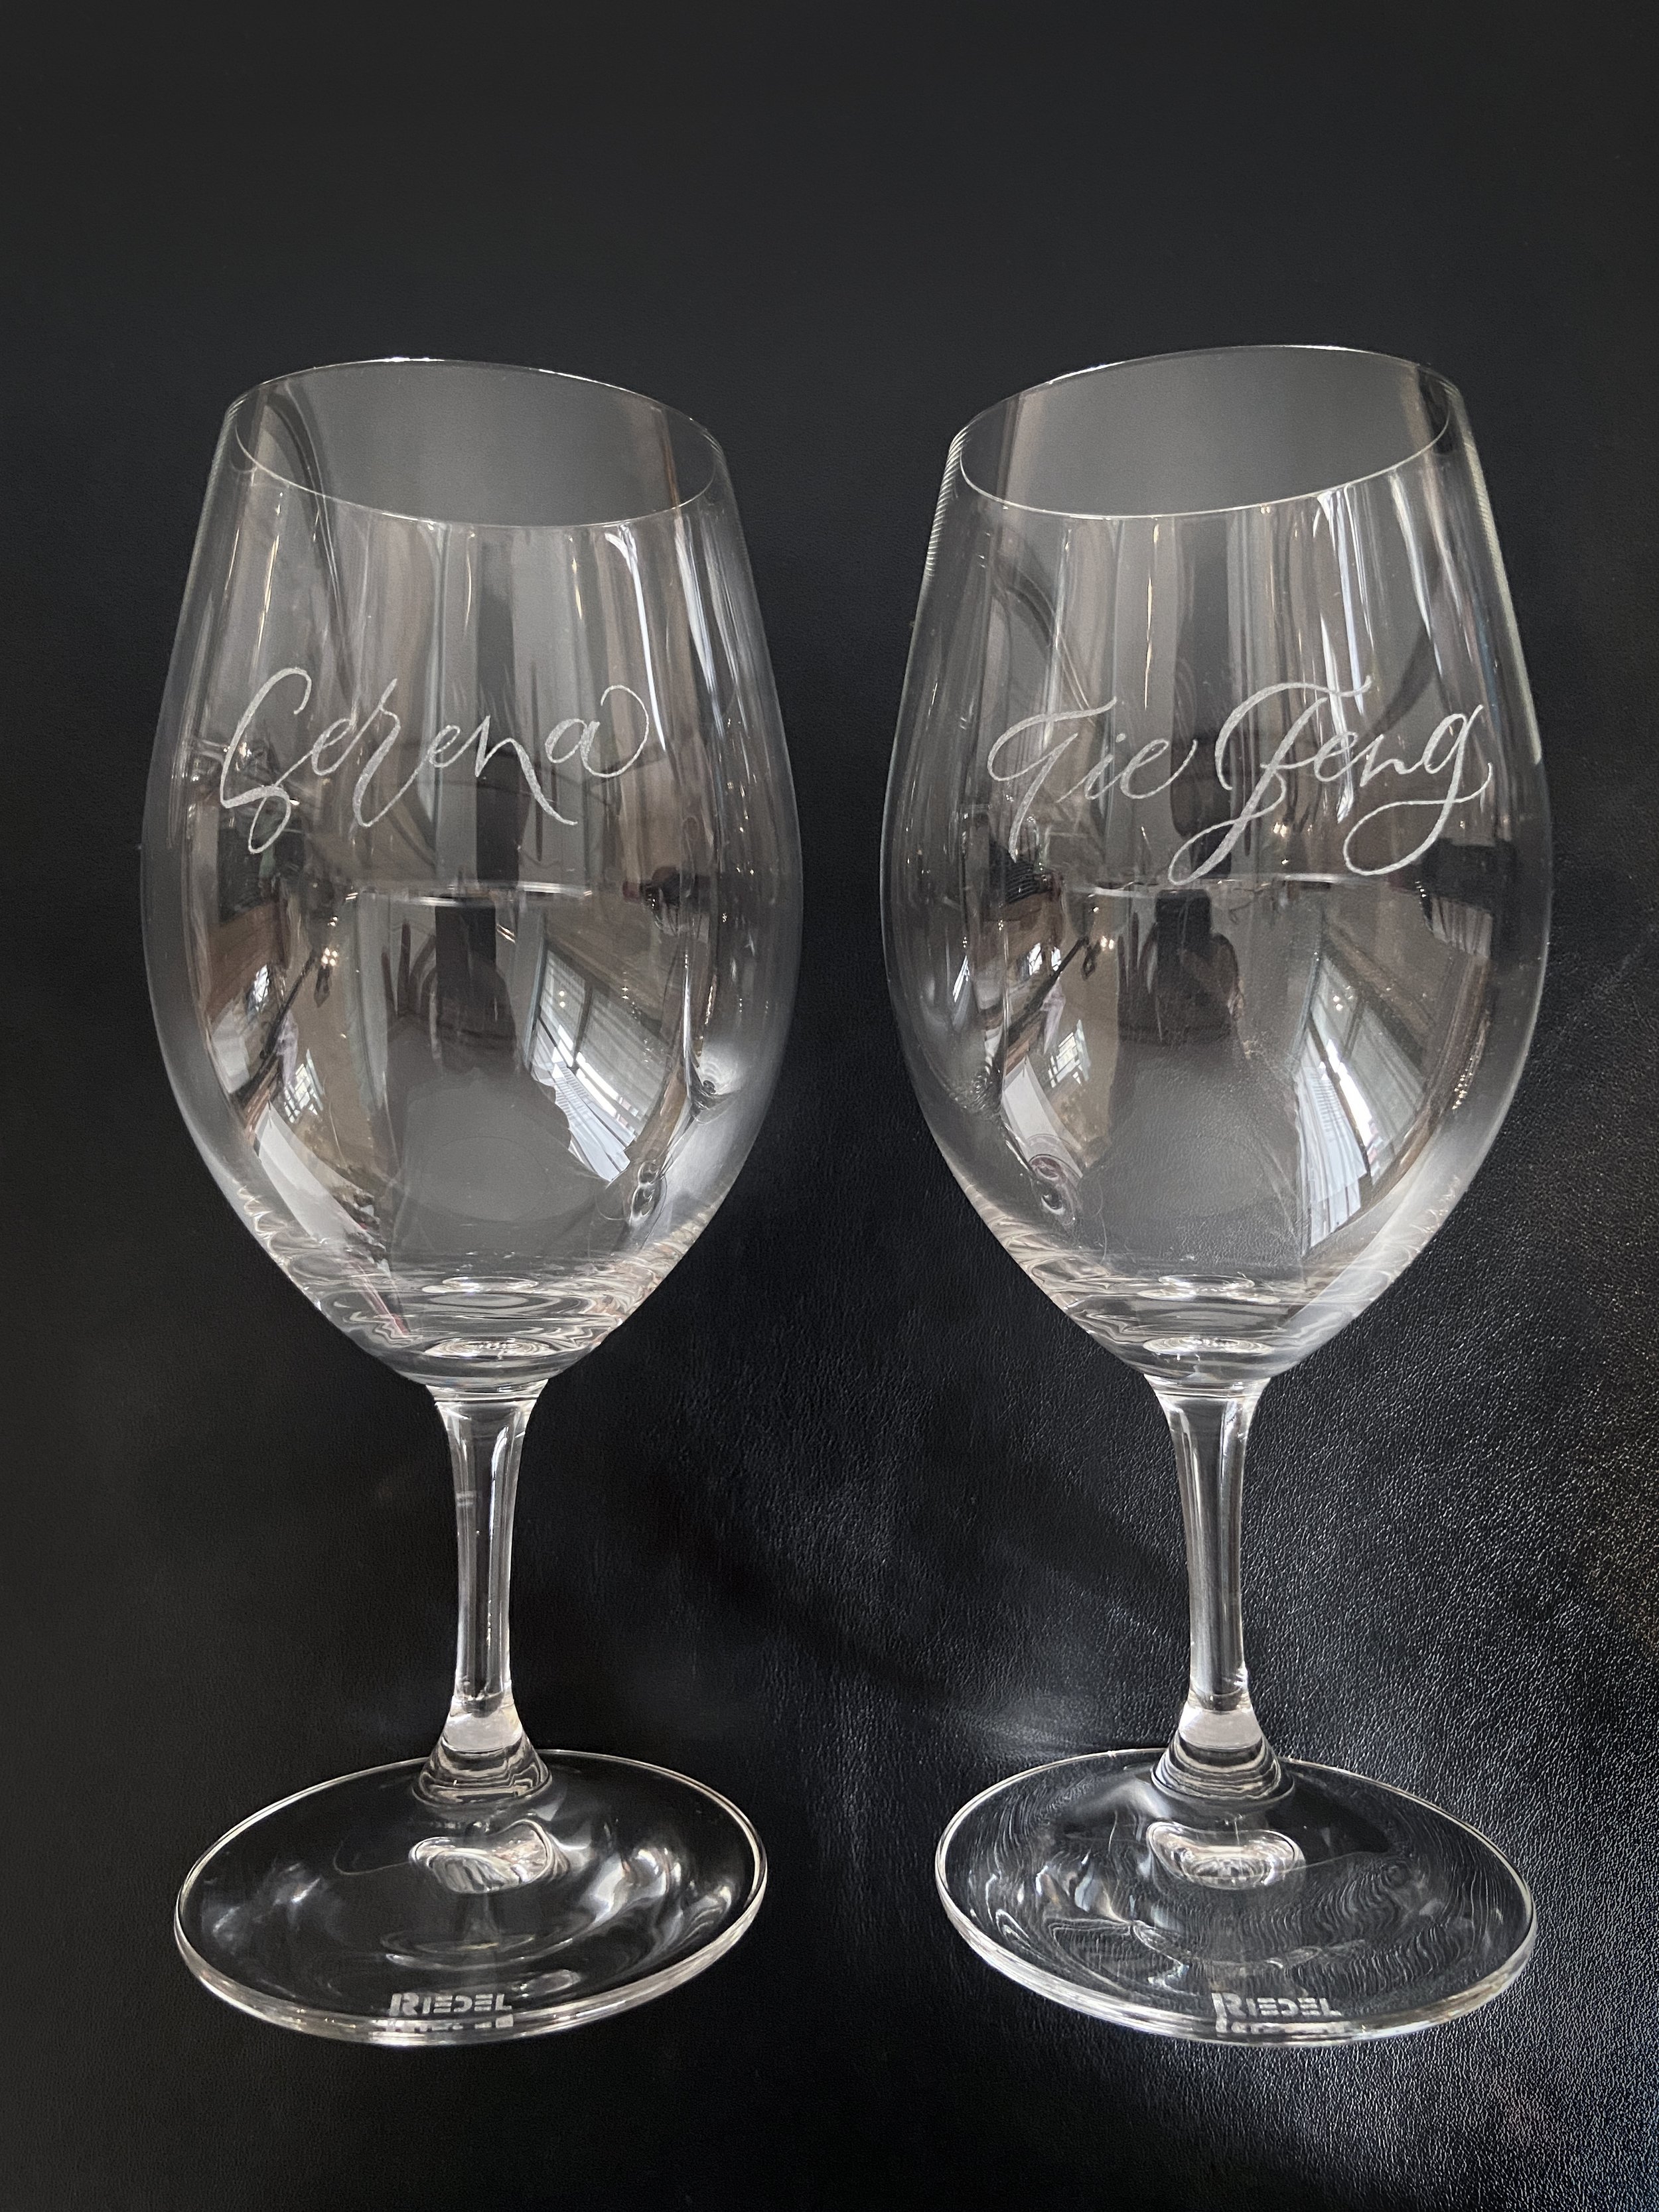 Calligraphy Engraving Riedel Wine Glasses